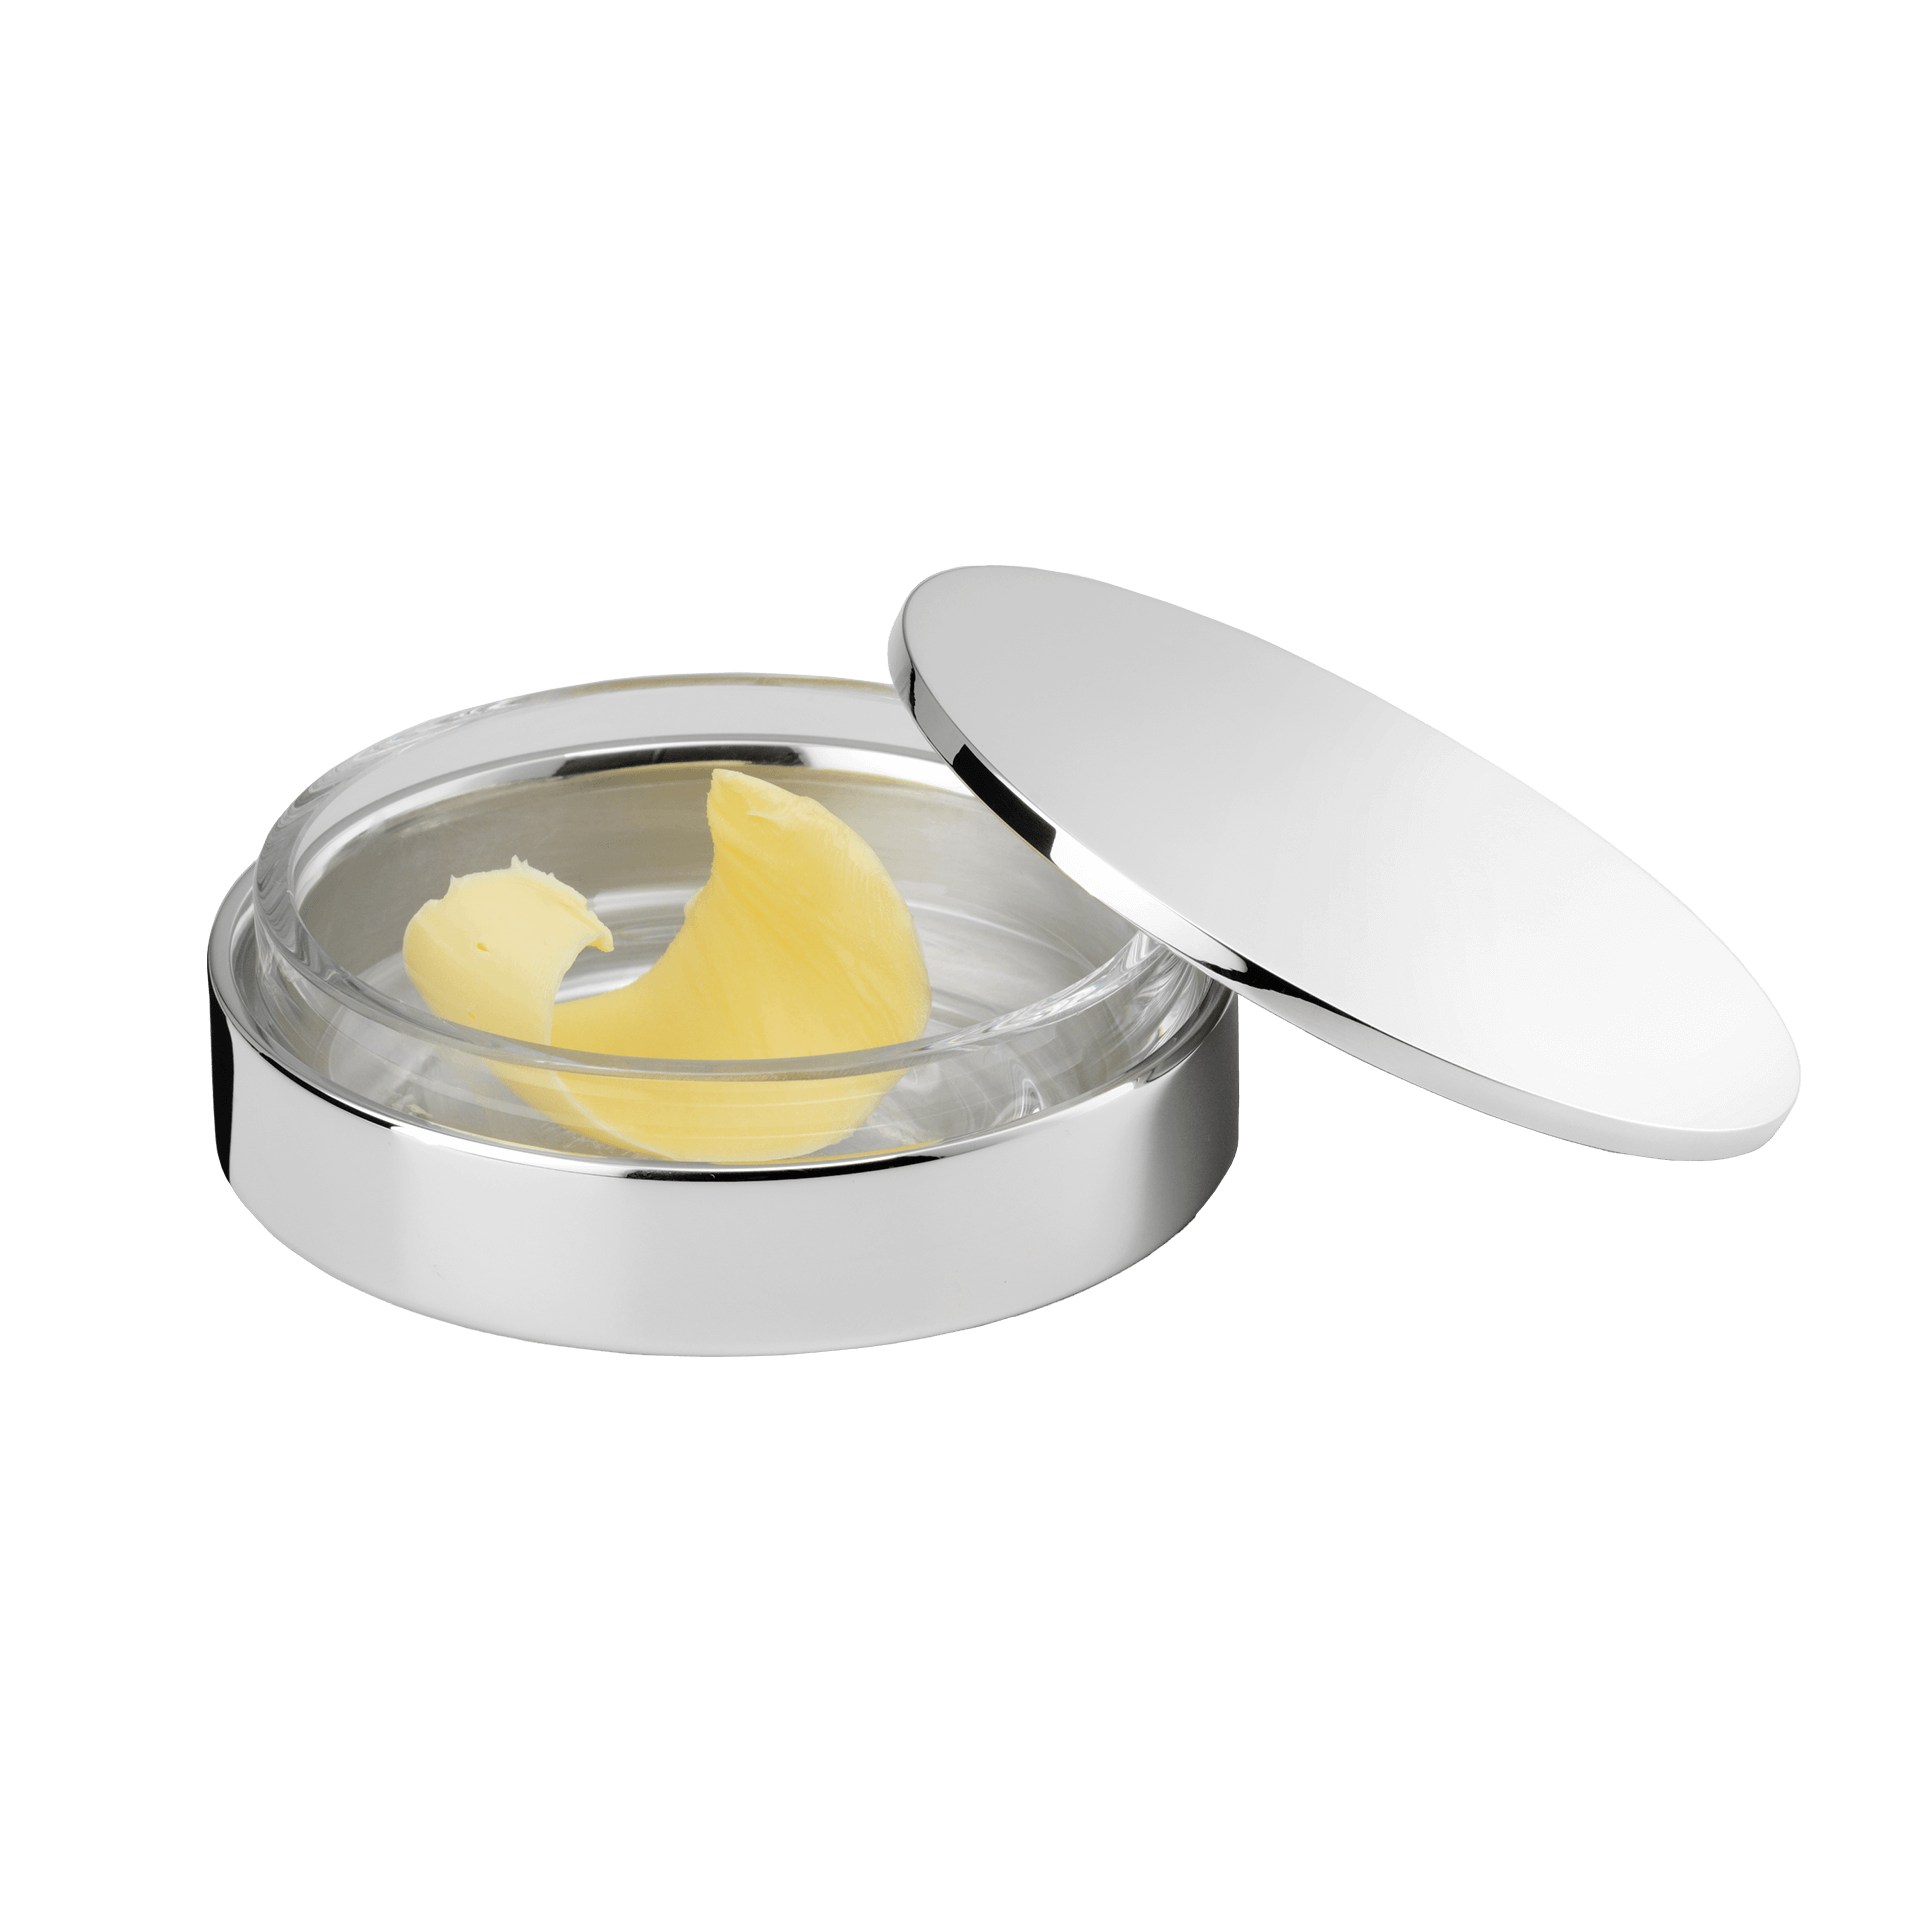 Butter dish with lid and glass insert (90g silverplated)